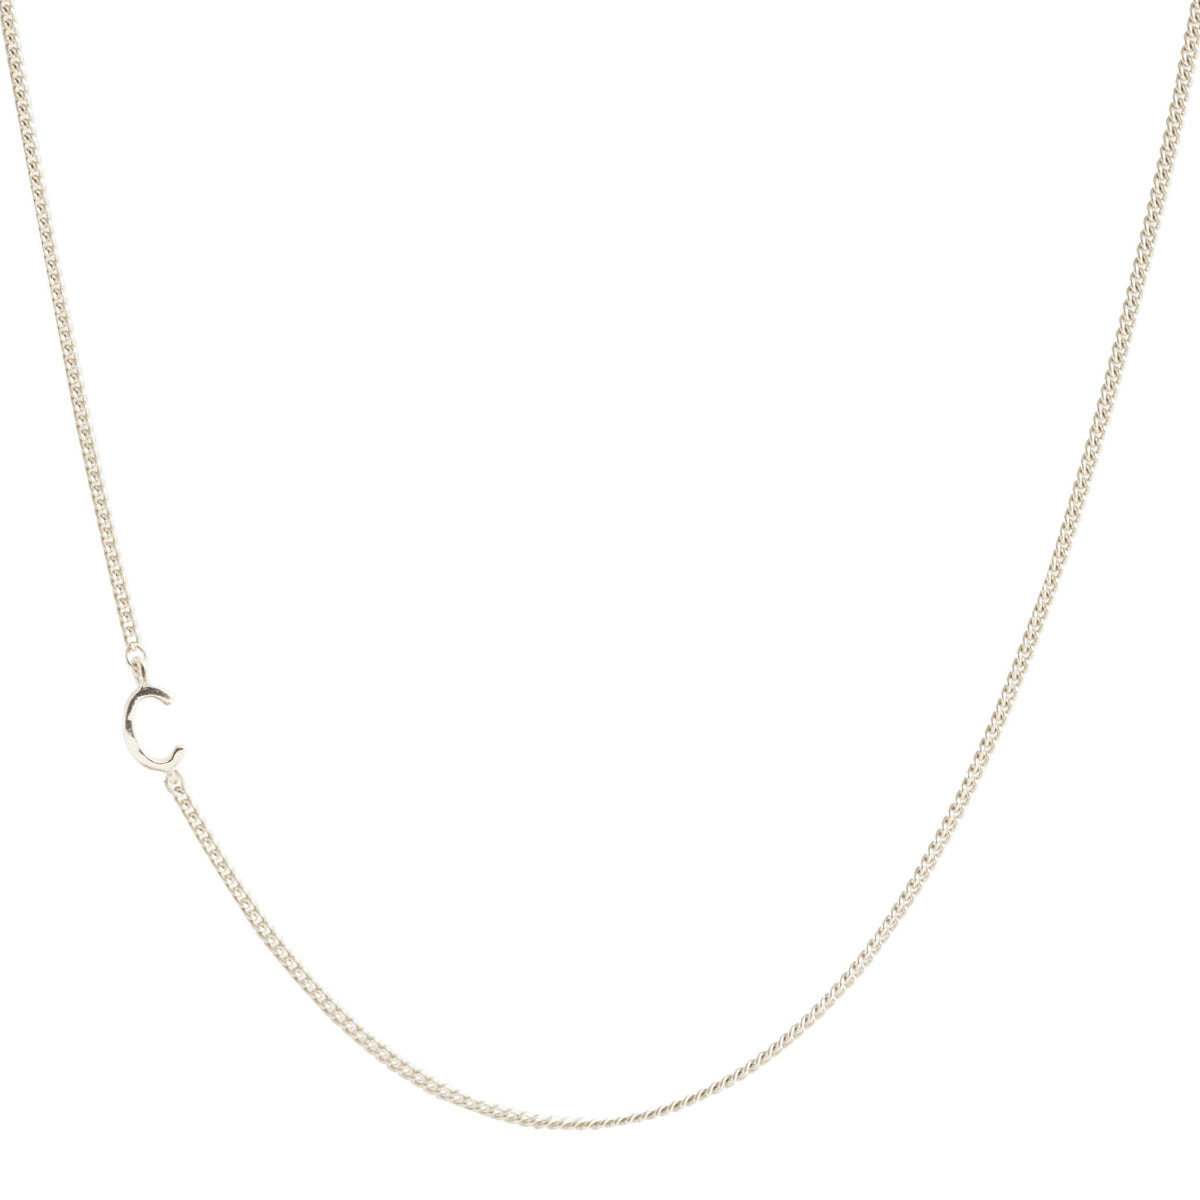 NOTABLE OFFSET INITIAL NECKLACE - C - GOLD, ROSE GOLD, SILVER - SO PRETTY CARA COTTER